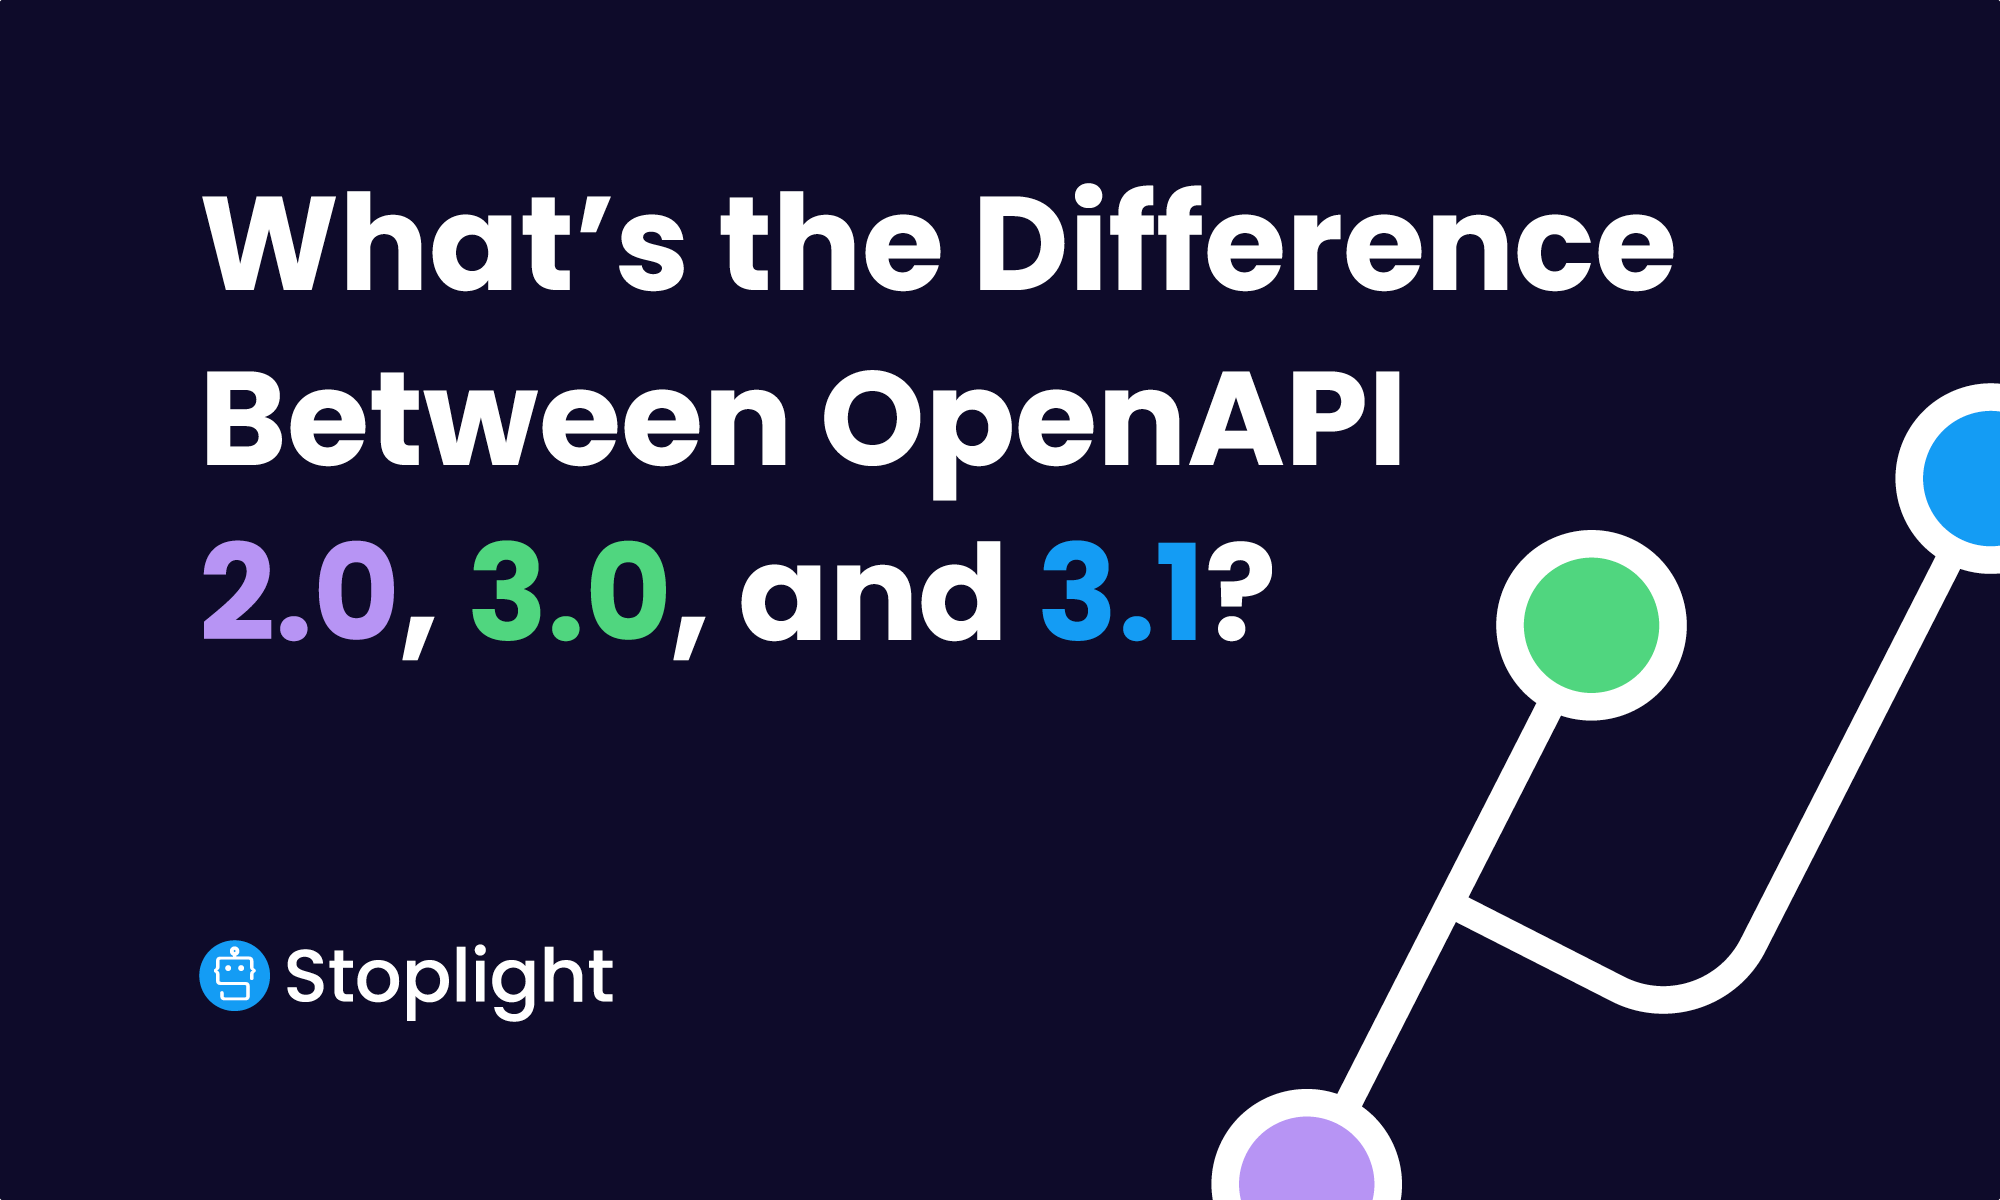 What’s the Difference Between OpenAPI Types 2.0, 3.0, and 3.1?